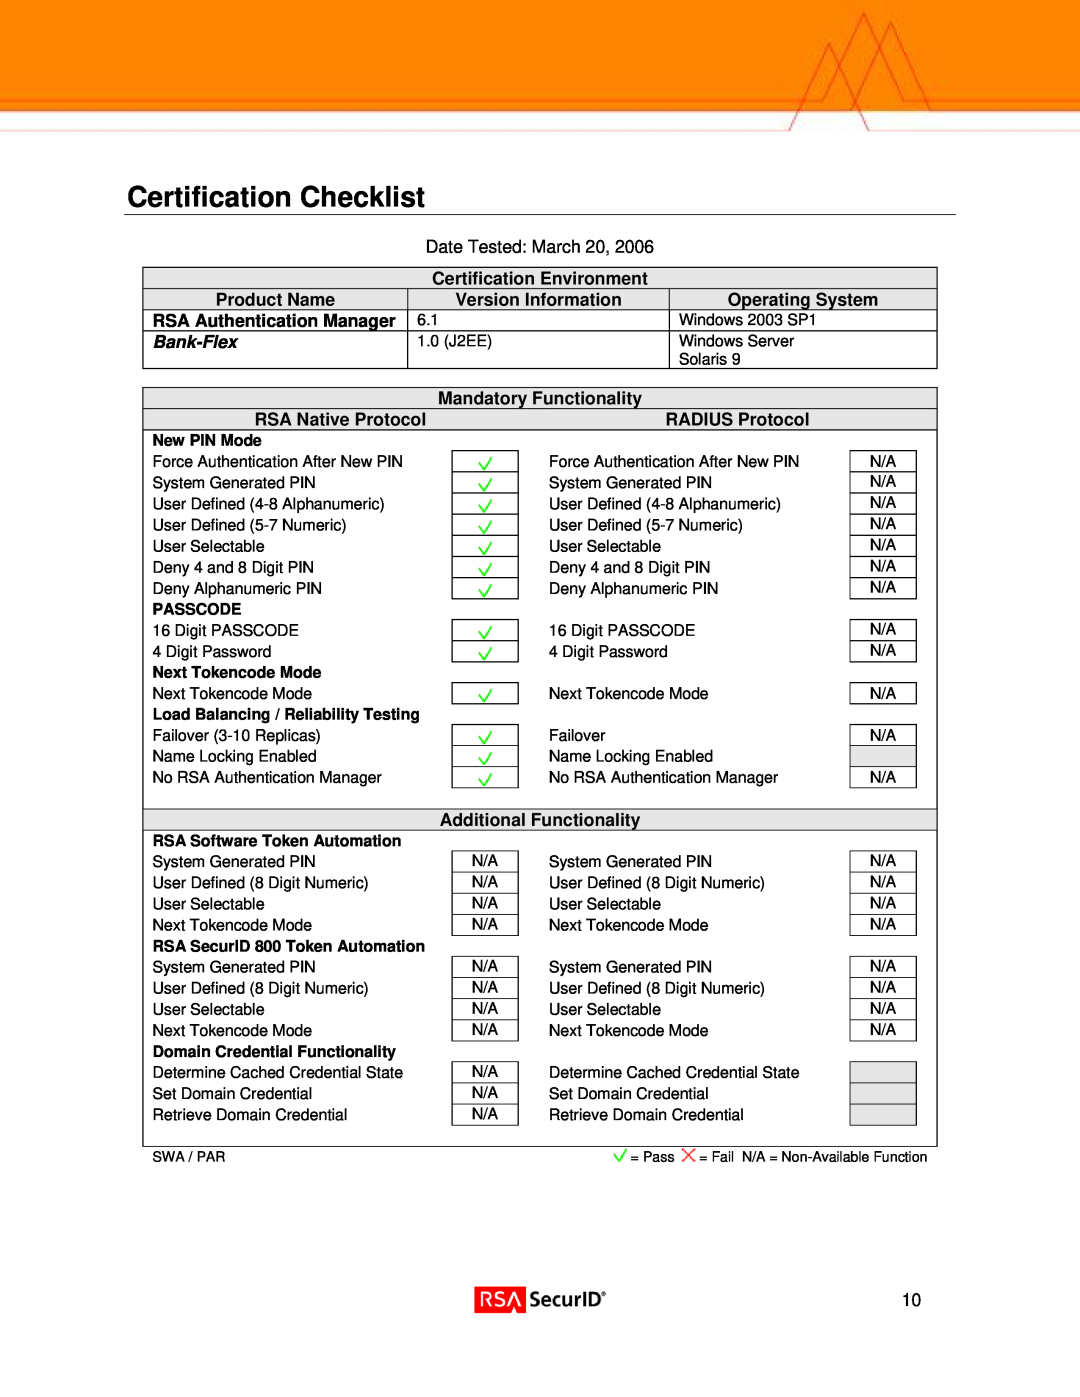 Eon Version 1.0 (J2EE) on Solaris 9 Certification Checklist, Certification Environment, Product Name, Version Information 